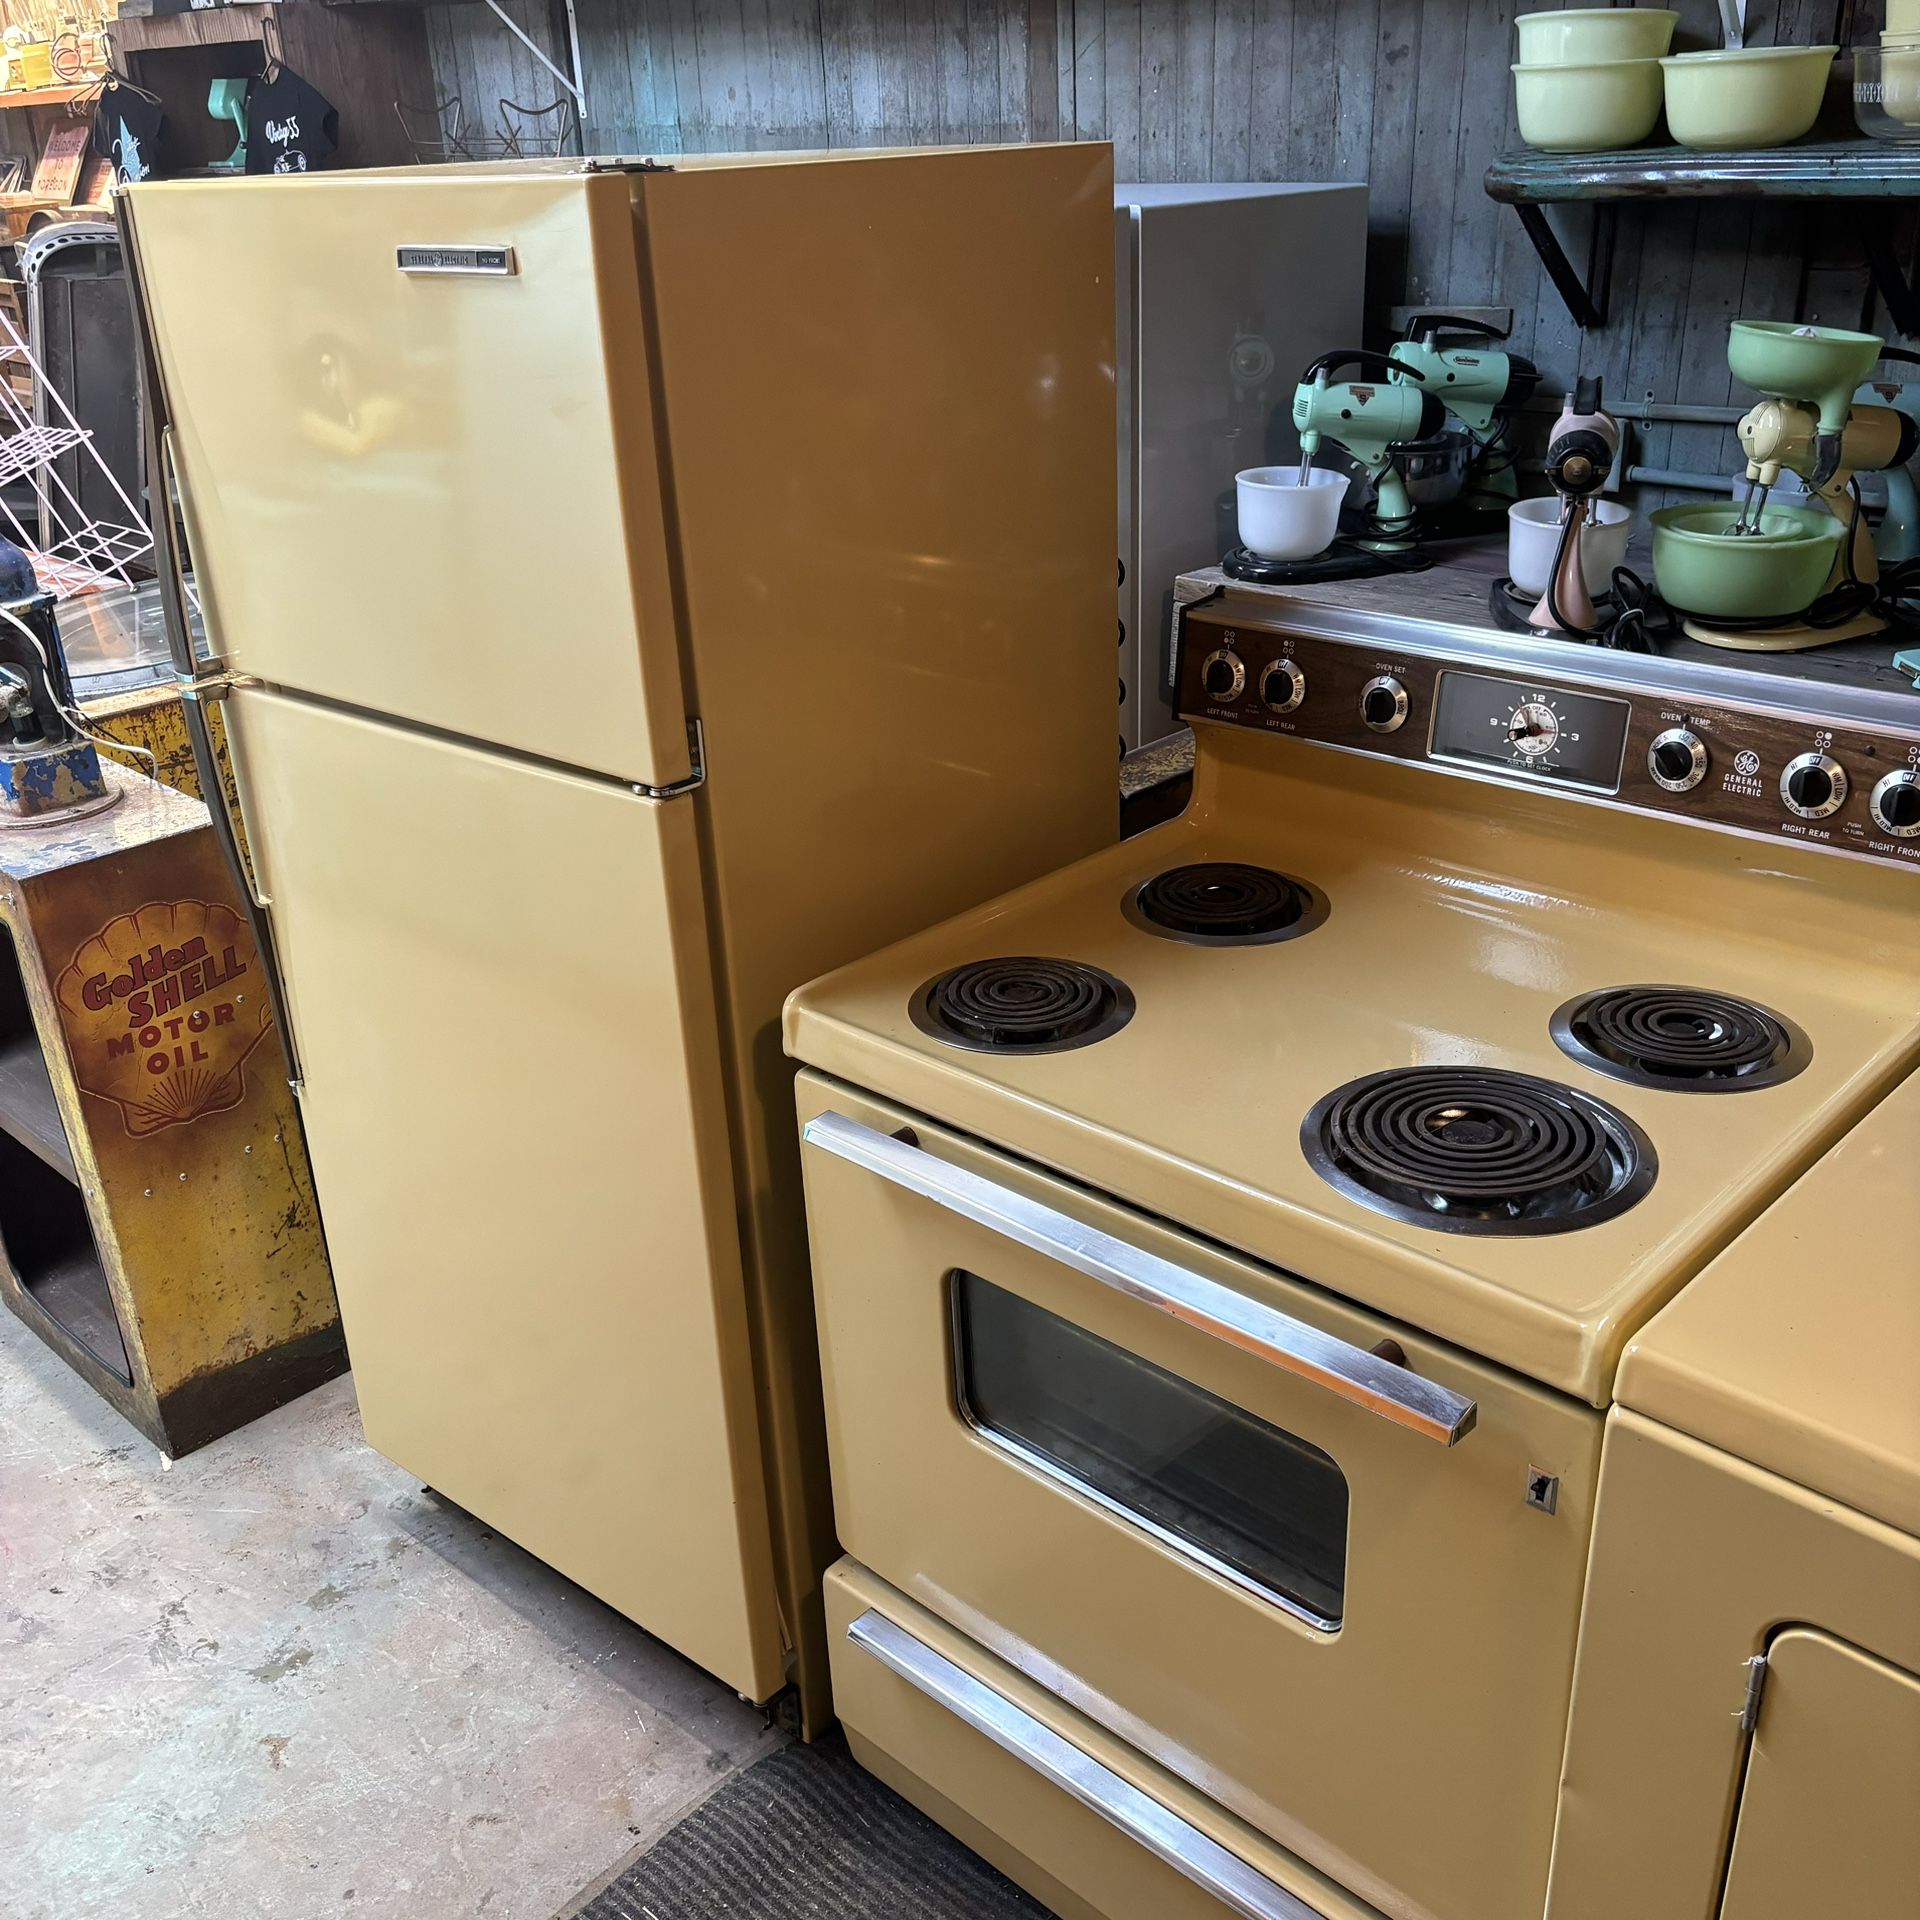 1970s 1960s Vintage Refrigerator And Oven Stove Range 